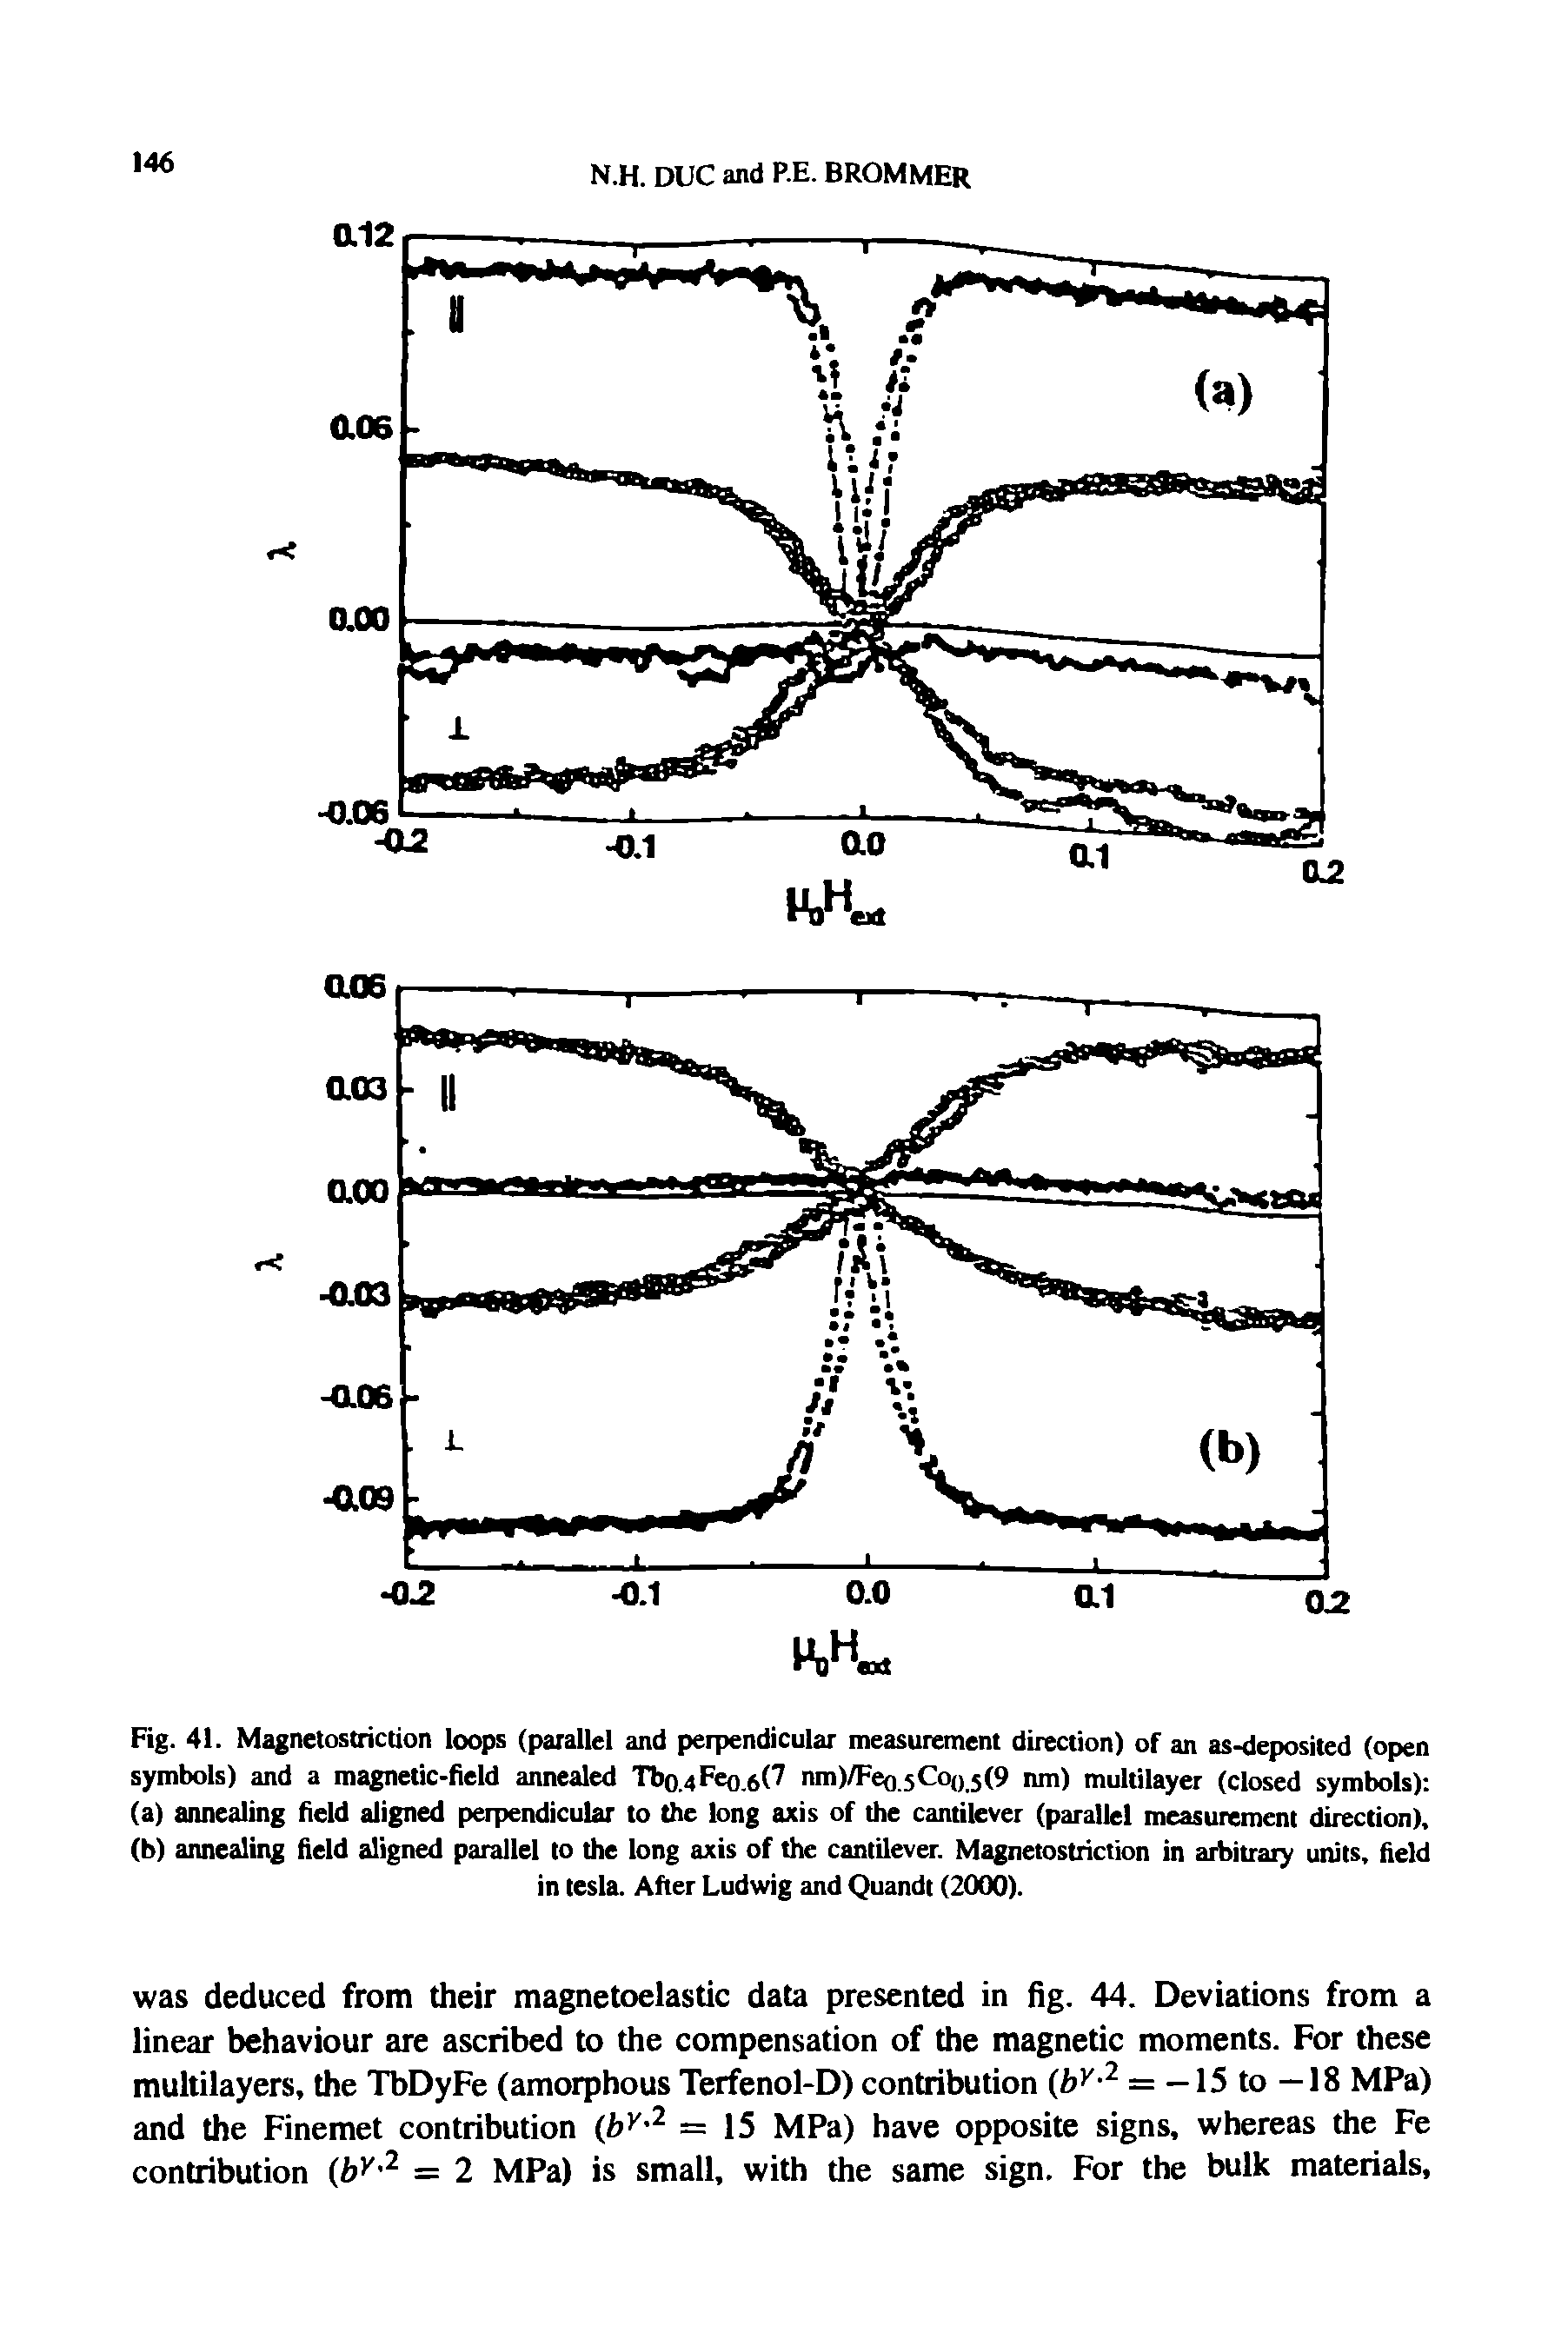 Fig. 41. Magnetostriction loops (parallel and perpendicular measurement direction) of an as-deposited (open symbols) and a magnetic-field annealed Tbo.4Feo.6(7 nm)/Feo 5C00 5(9 nm) multilayer (closed symbols) ...